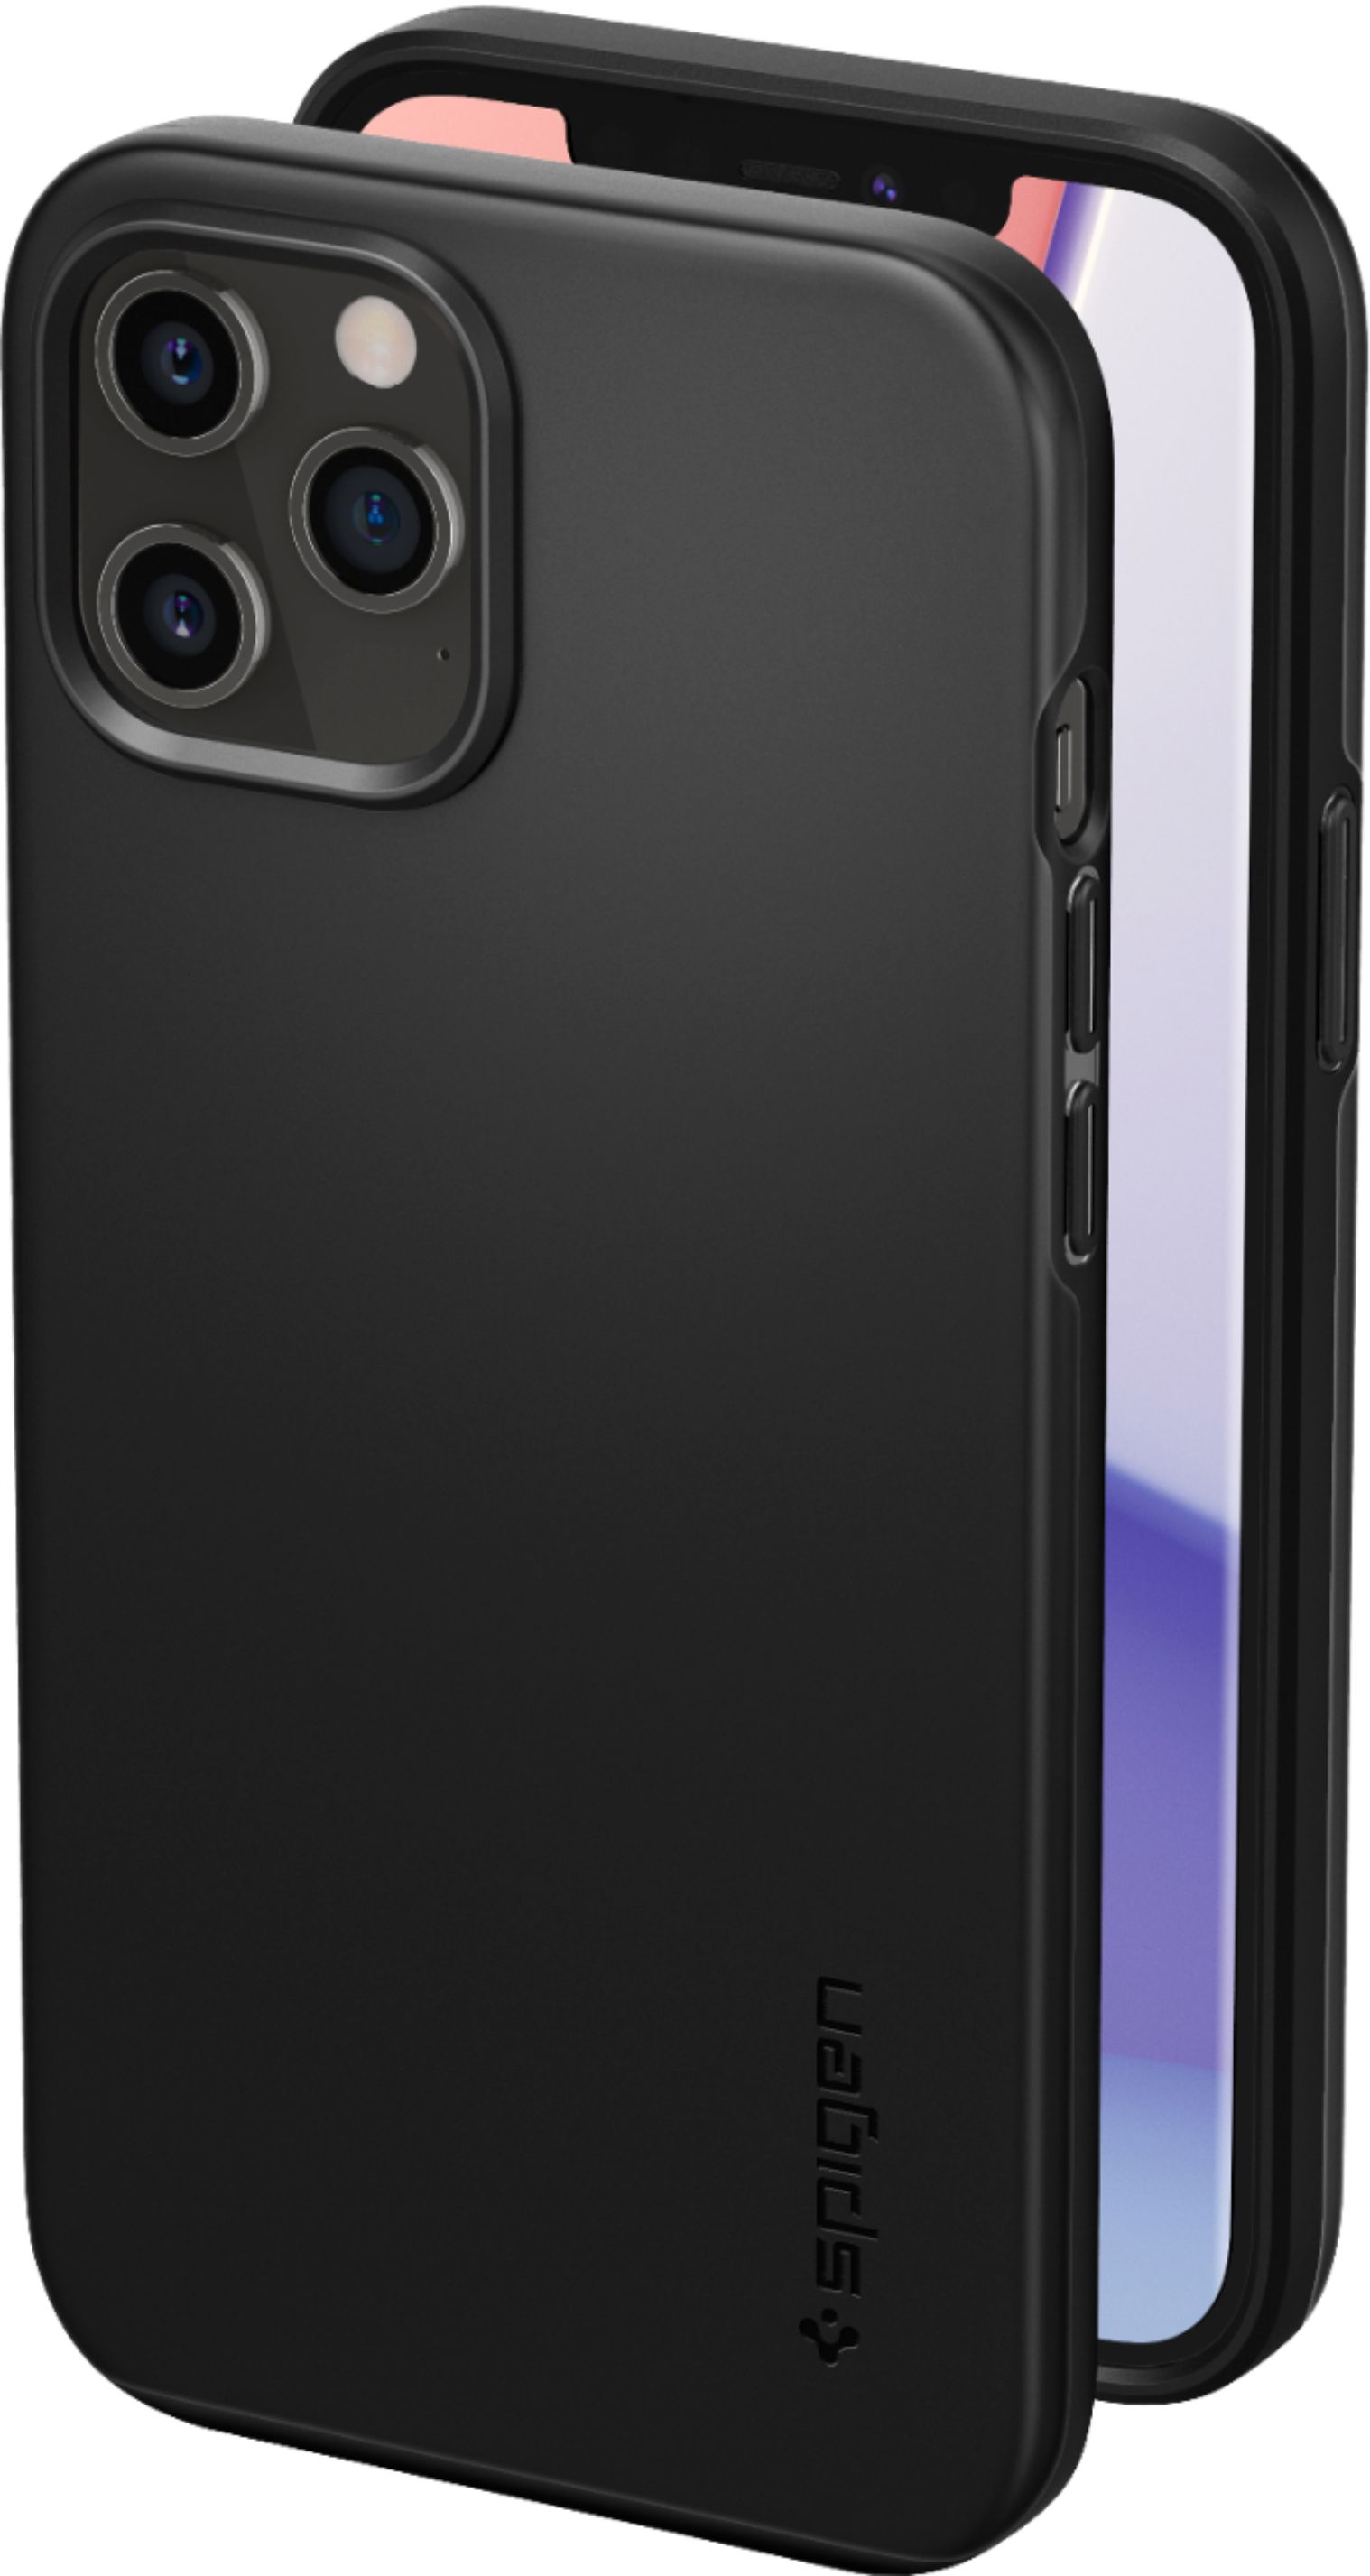 Spigen Thin Fit Hard Shell Case for Apple iPhone 13 Pro Max & iPhone 12 Pro  Max Black 55778BBR - Best Buy